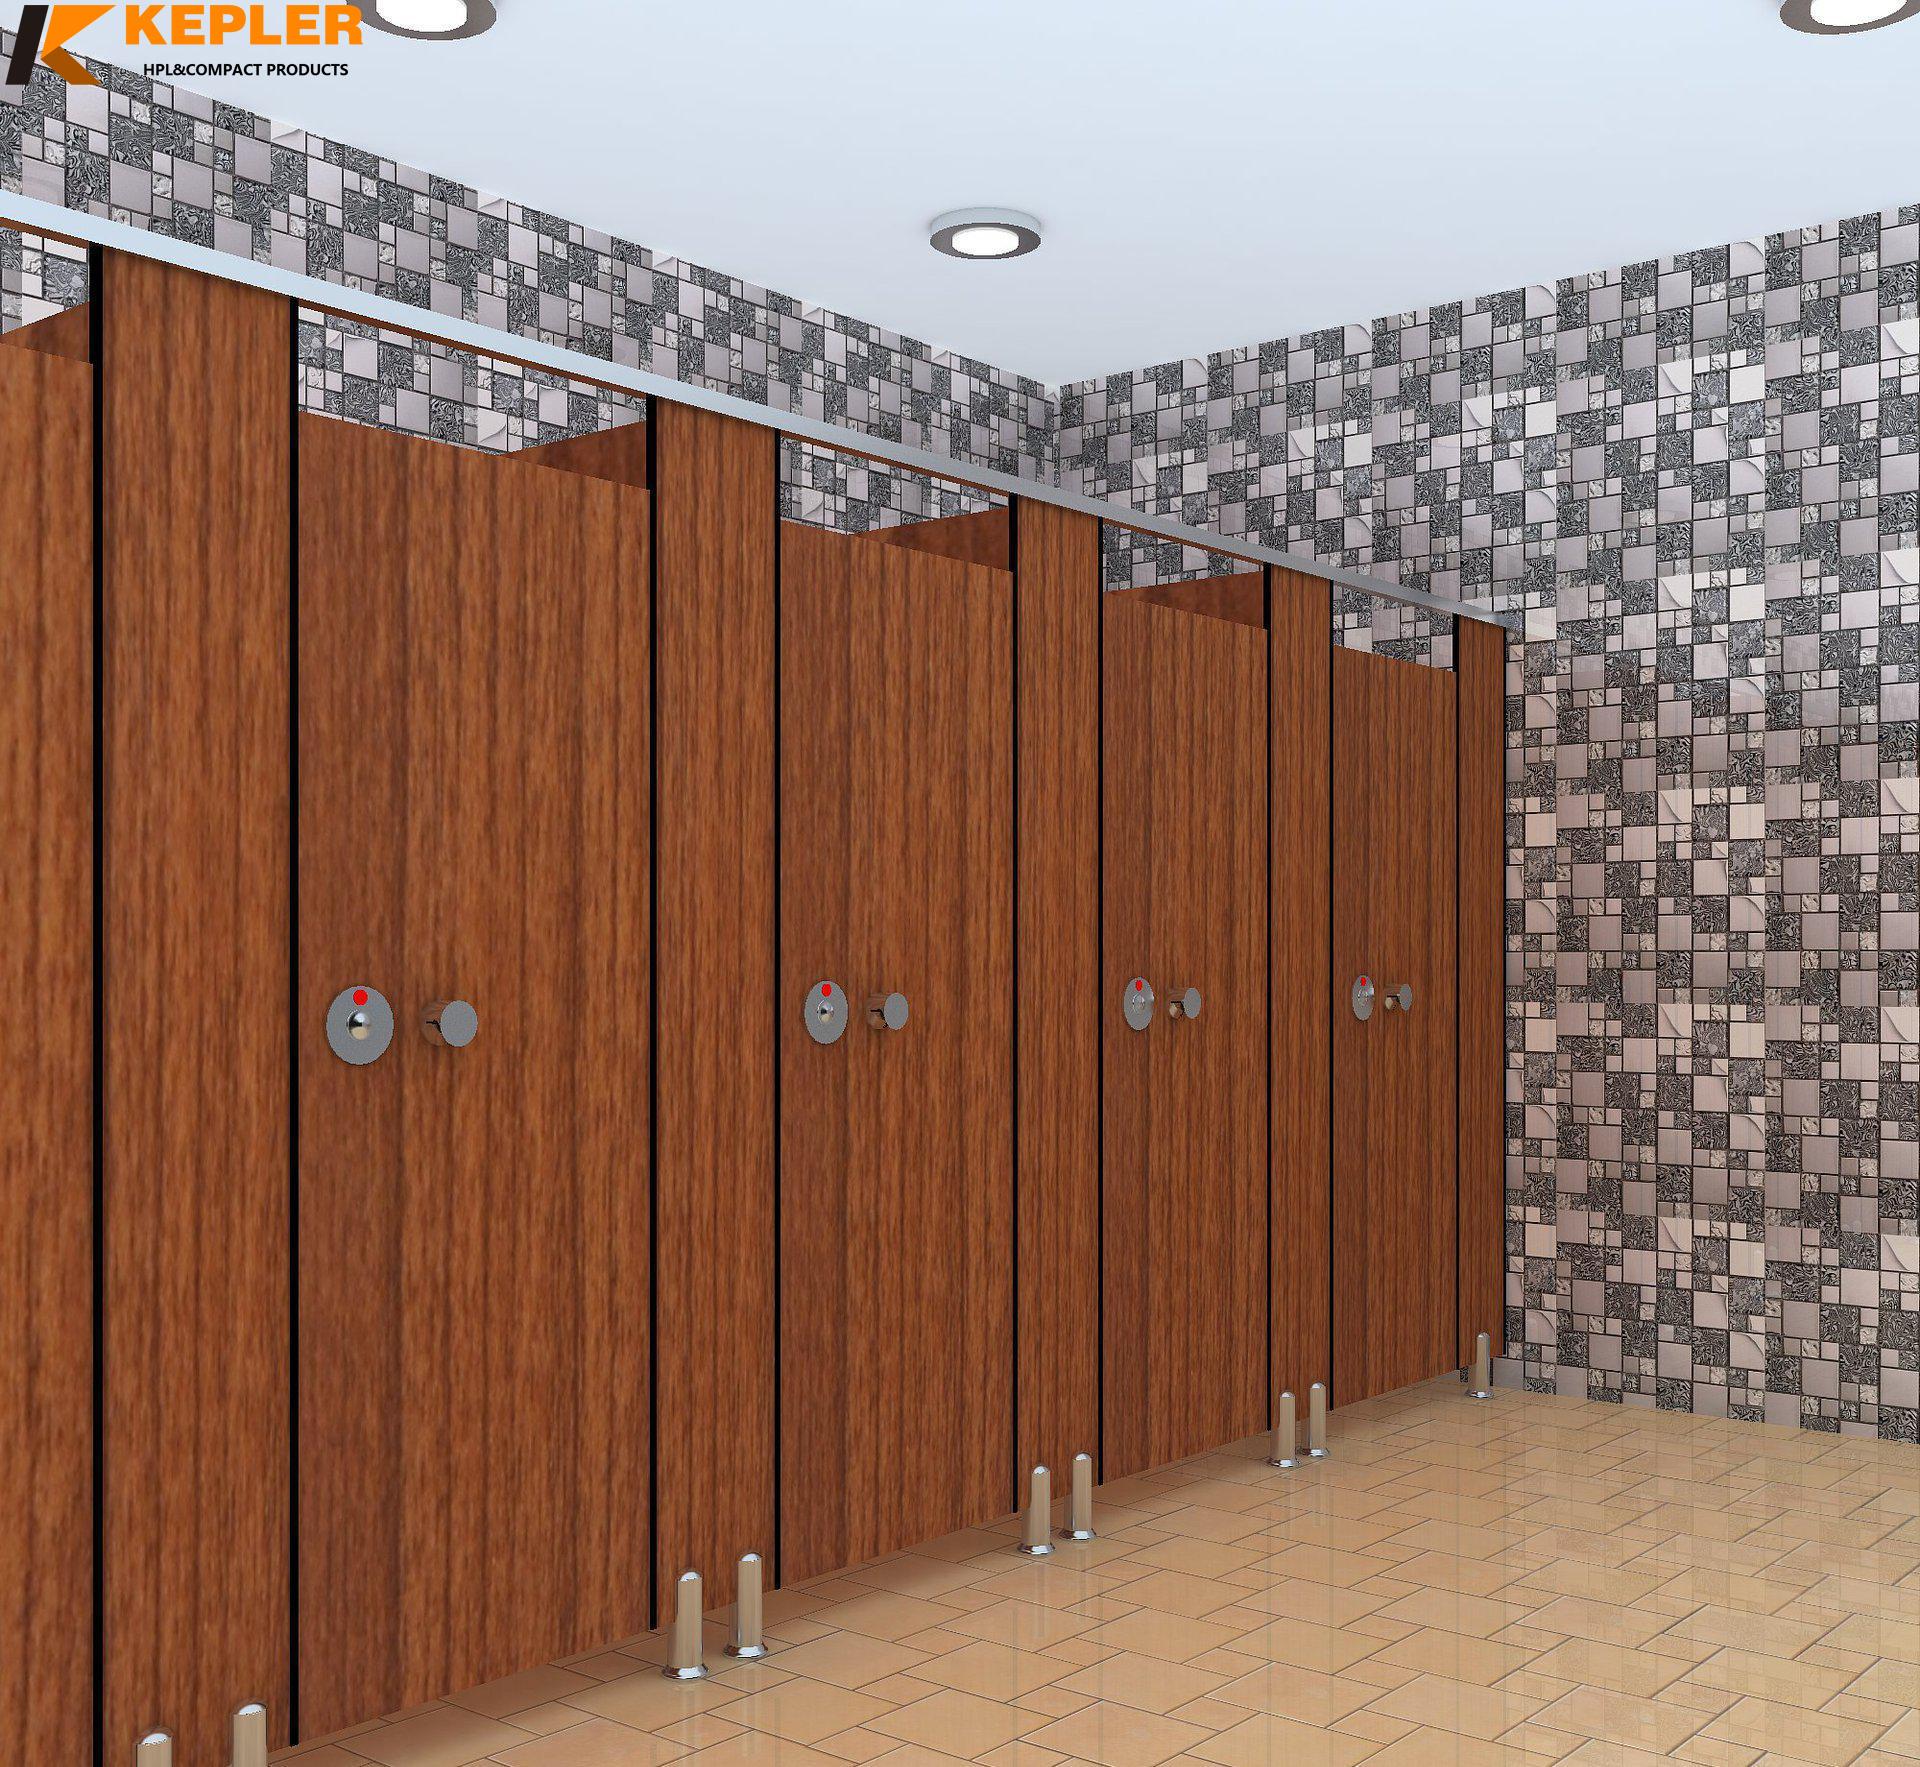 High quality 12mm waterproof phenolic hpl compact laminate shower room WC toilet cubicle door partitions board with cheap price